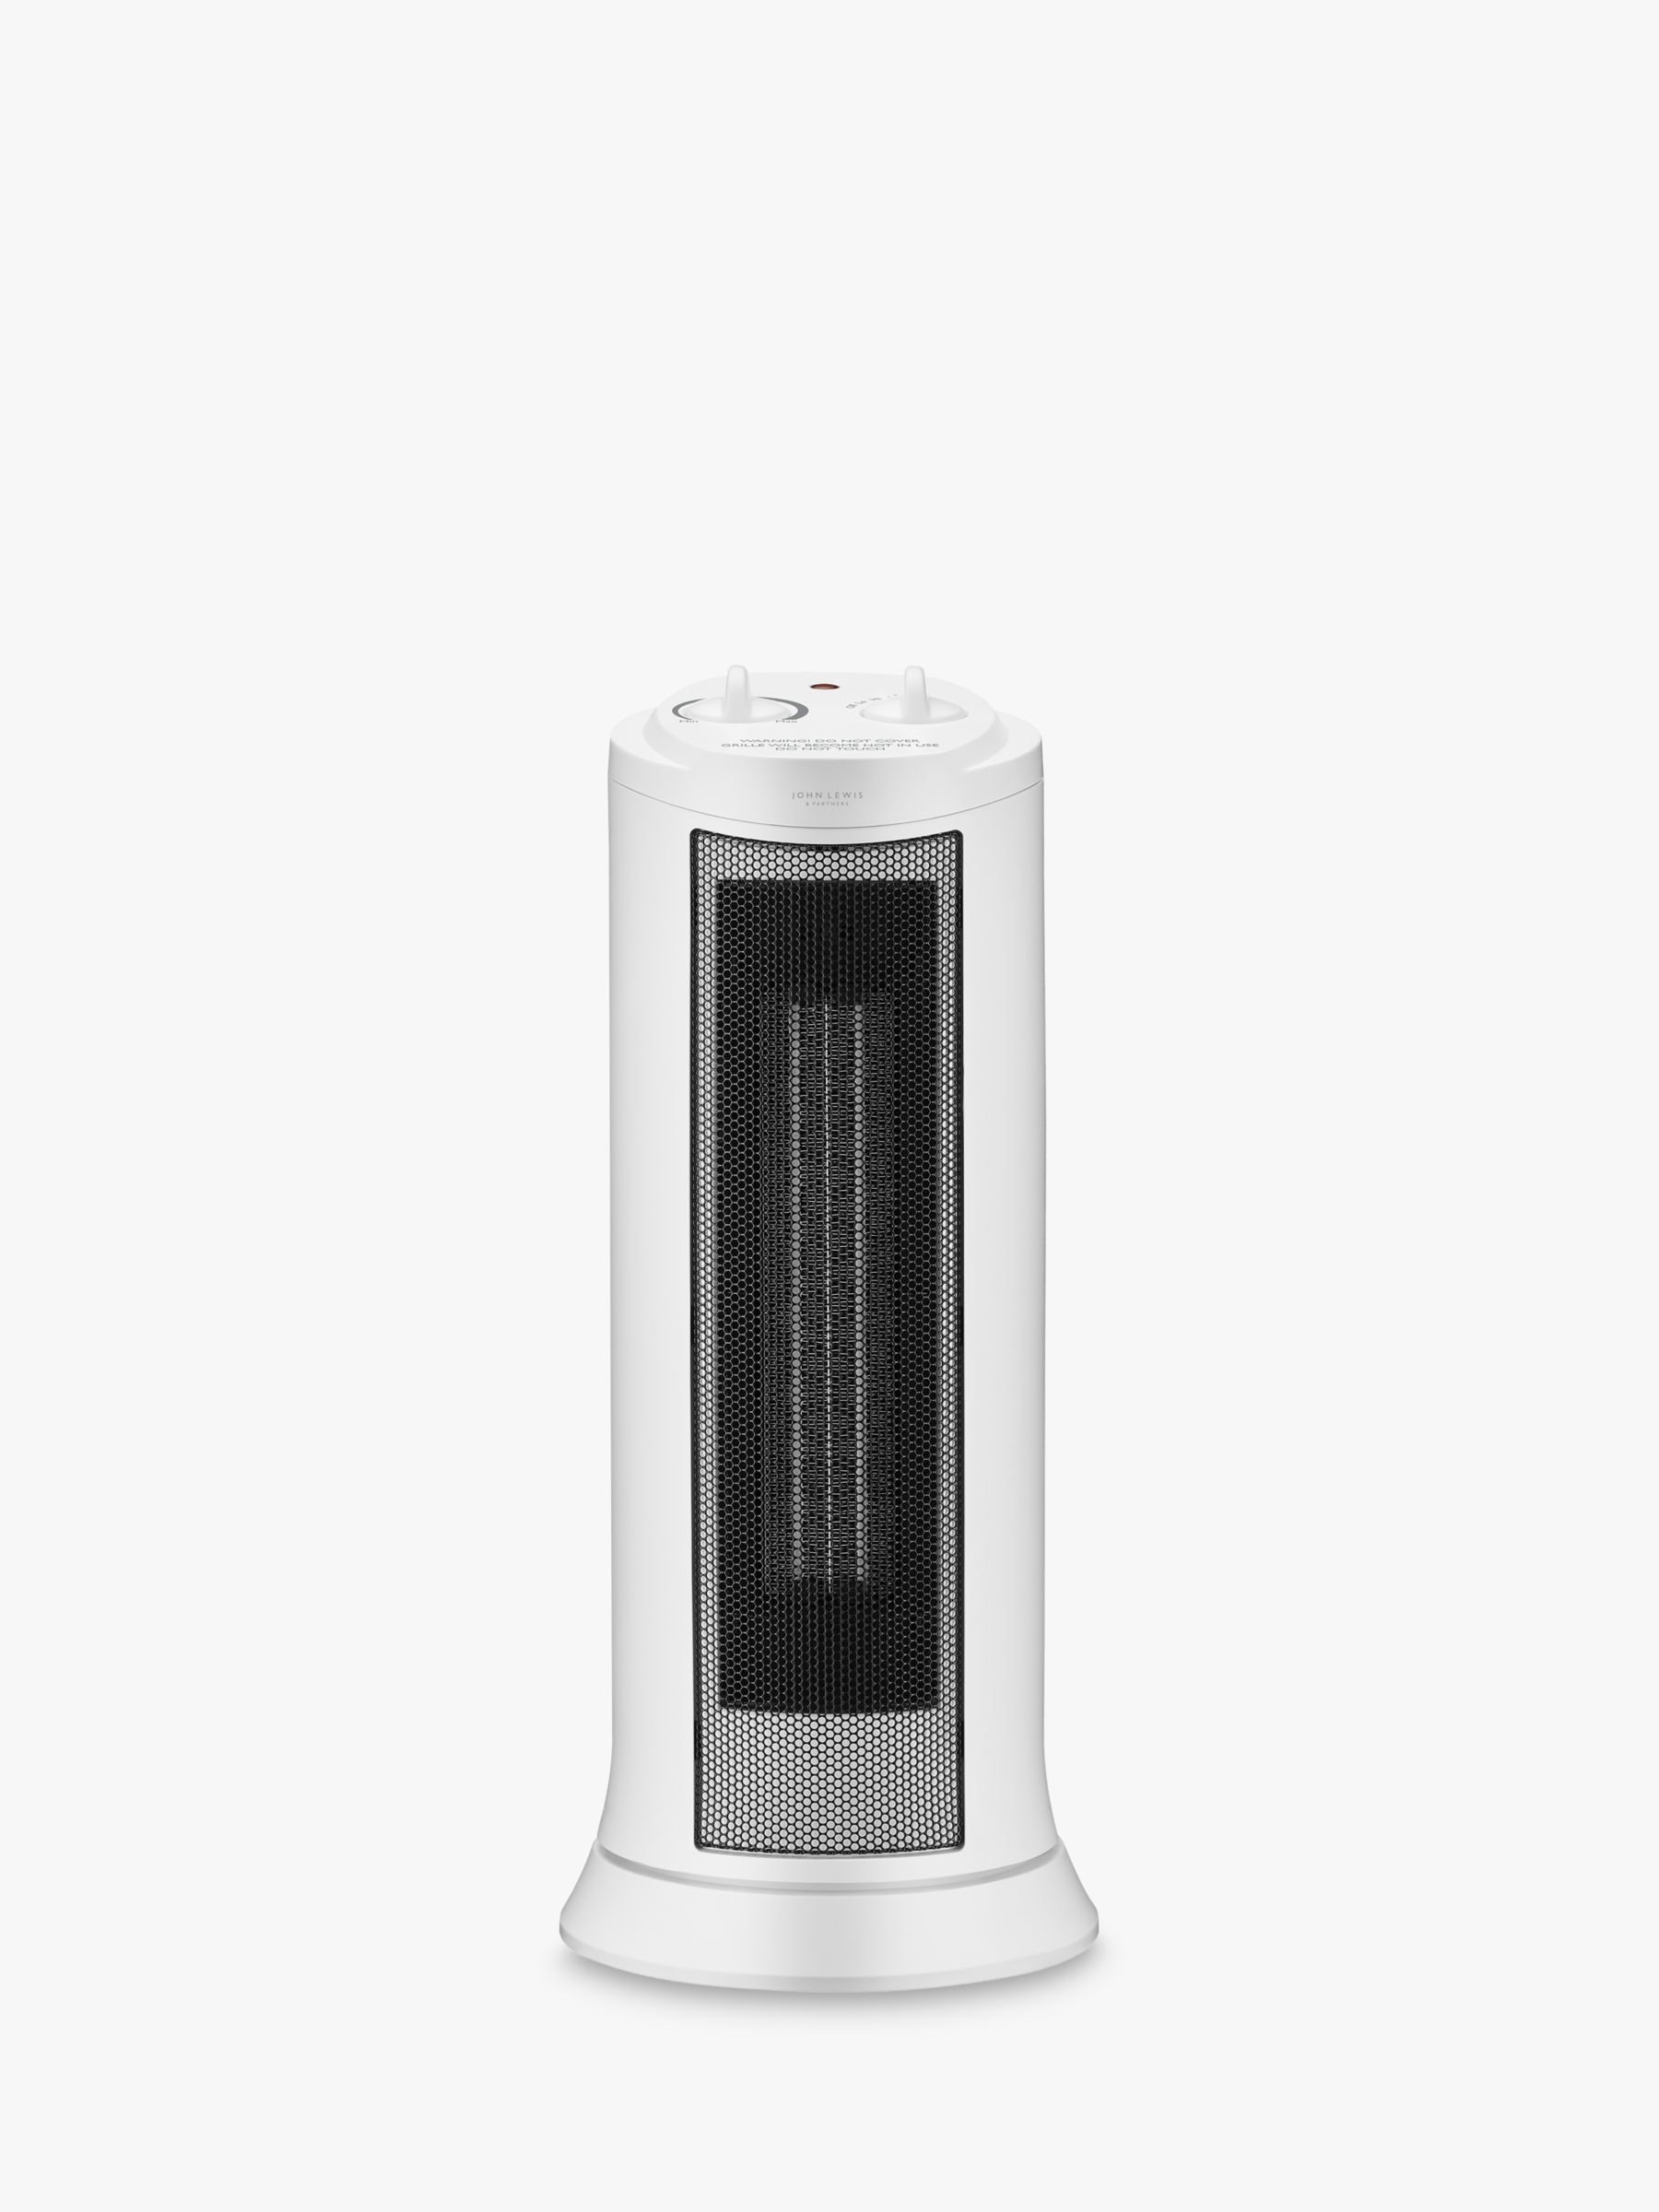 John Lewis Partners Mini Tower Fan Heater White Tower with regard to dimensions 1800 X 2400